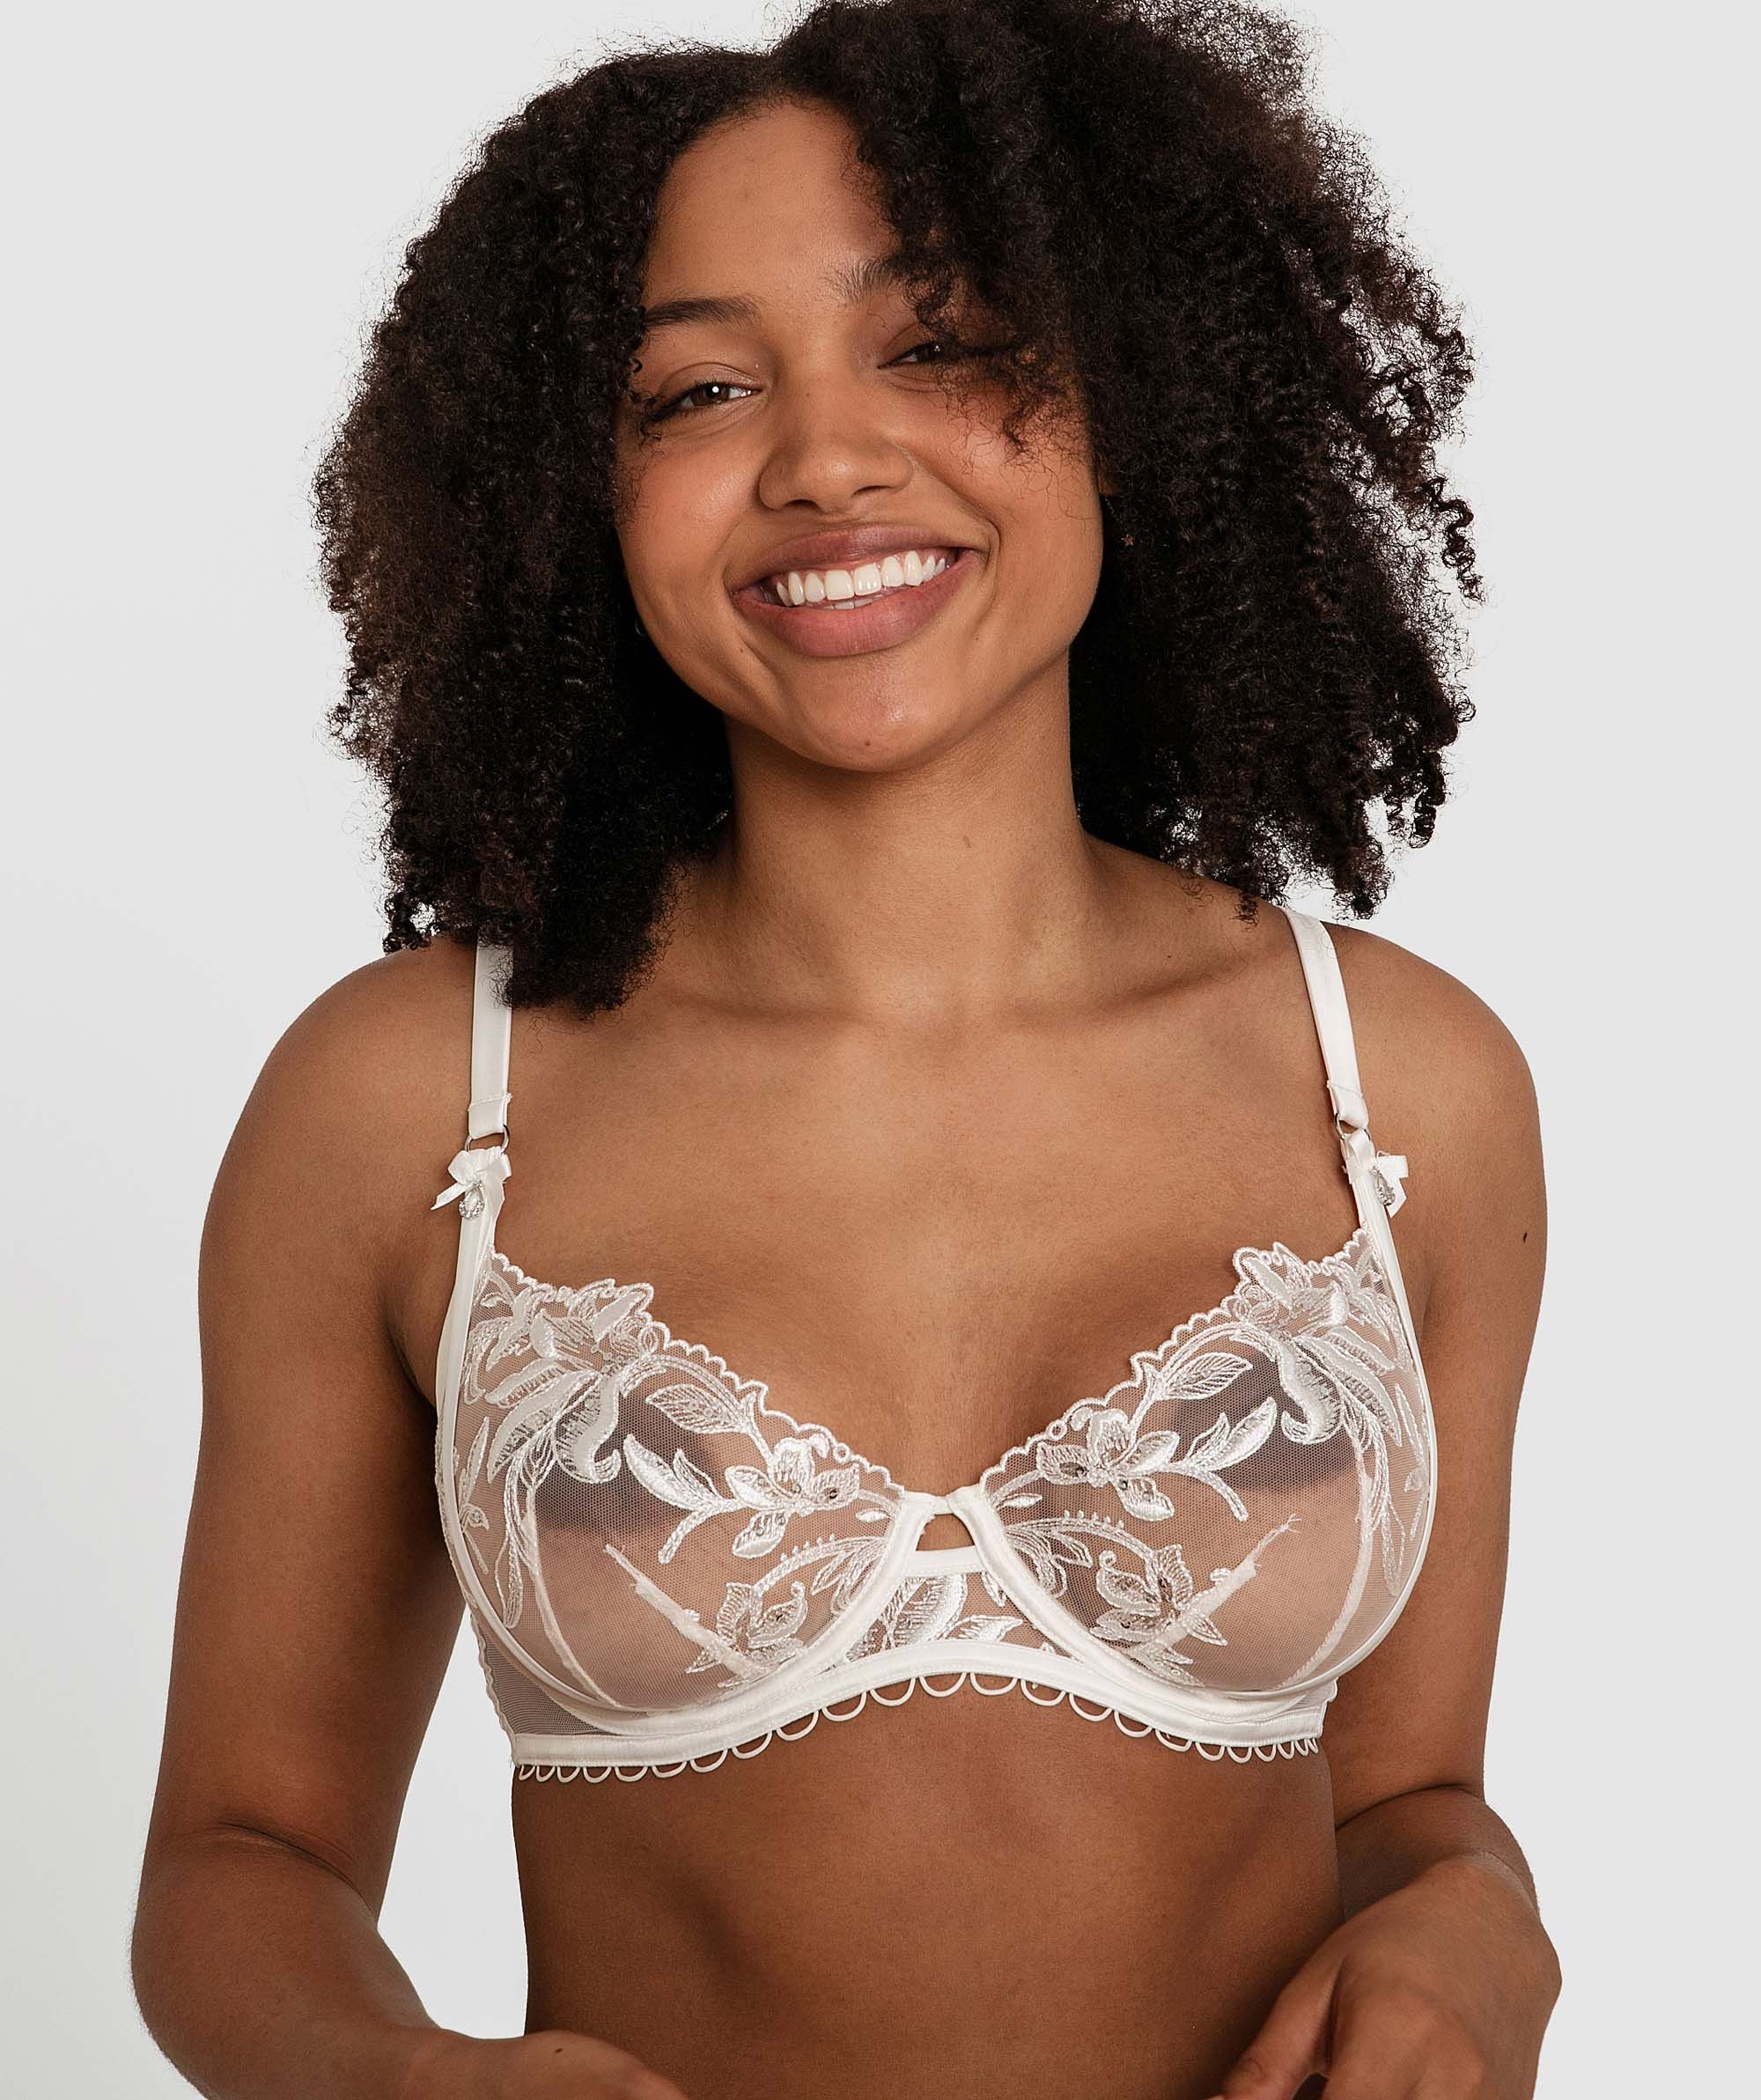 Transparent Bra: Invisible Support for
Effortless Style